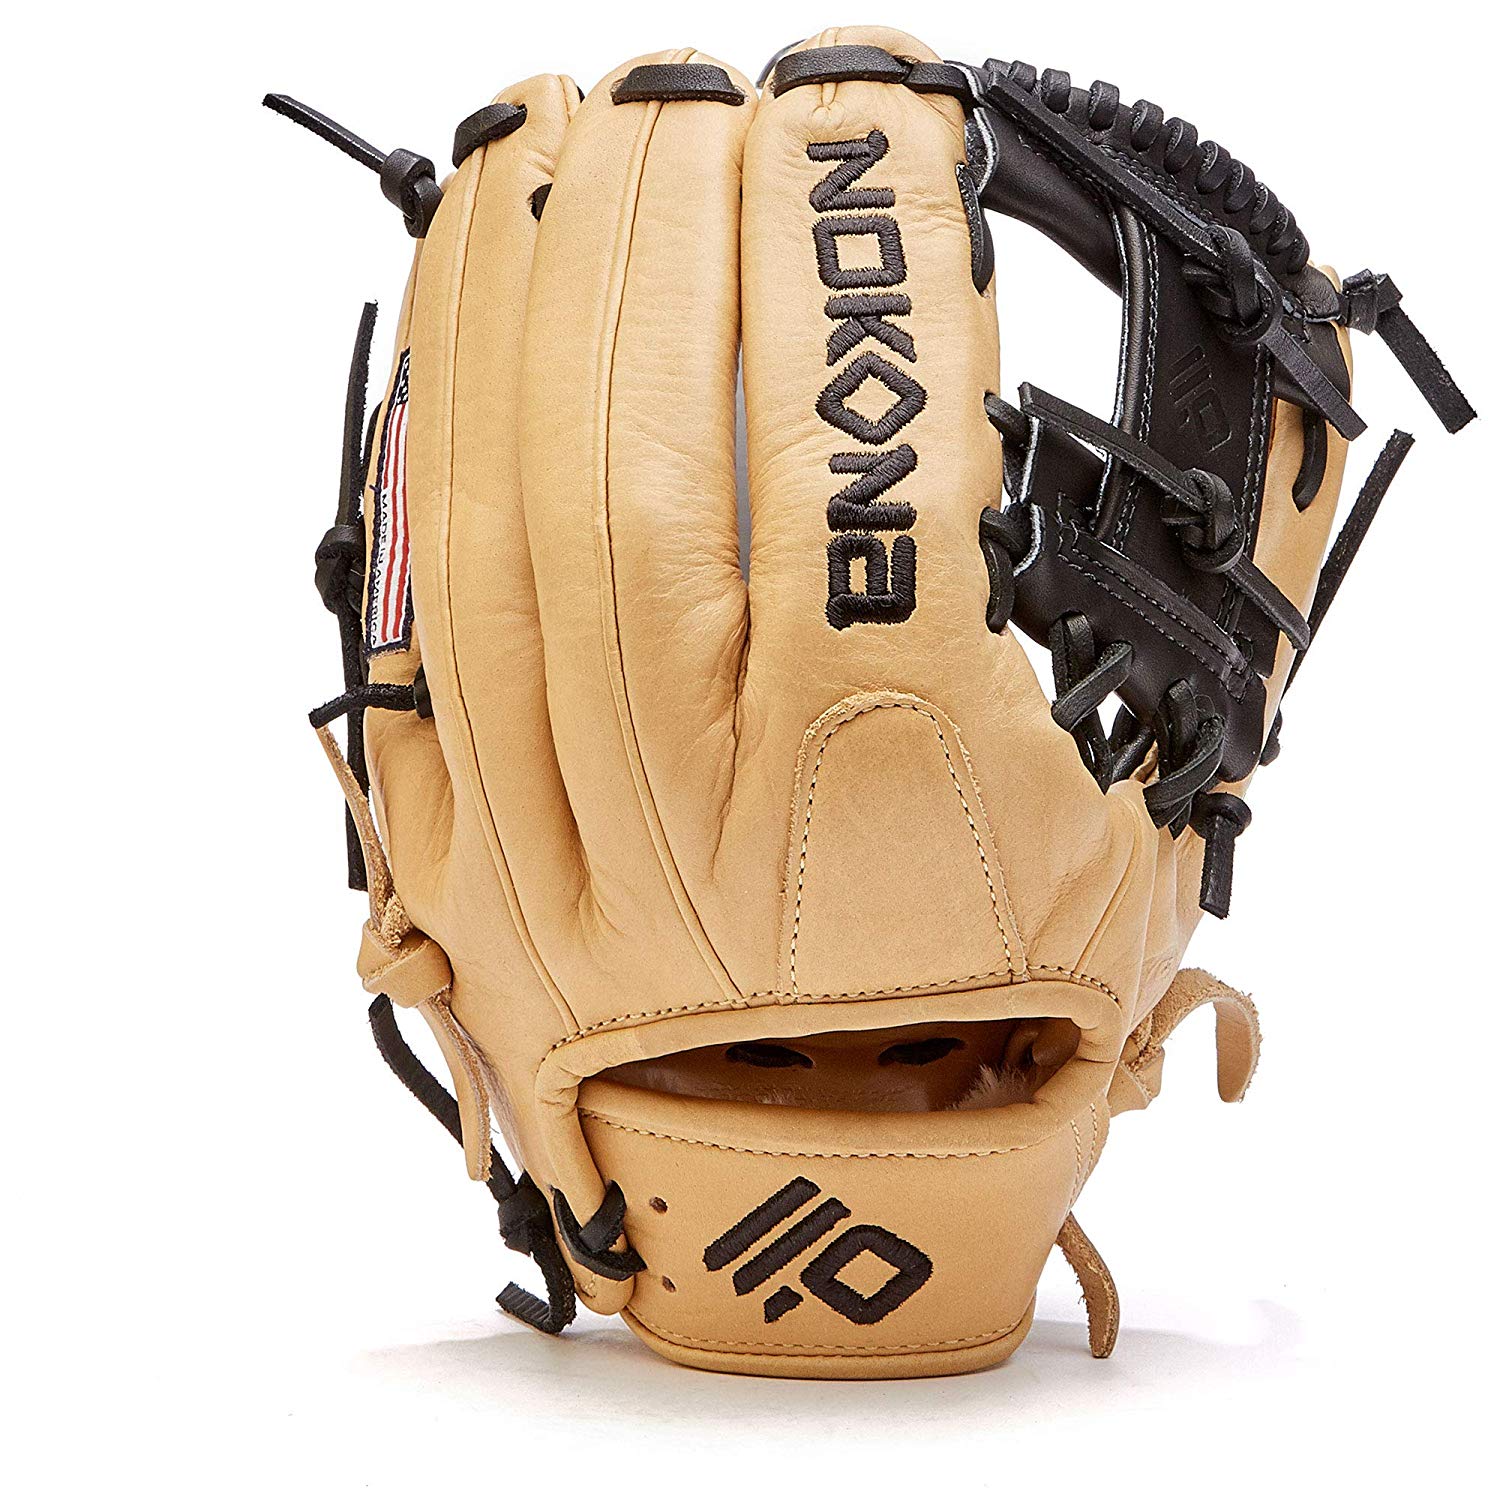 nokona-skn-select-baseball-glove-11-25-skn-200i-right-hand-throw SKN-200I-RightHandThrow Nokona 808808893622 I Web Lightweight and highly structured Some player break-in required Manufacturers